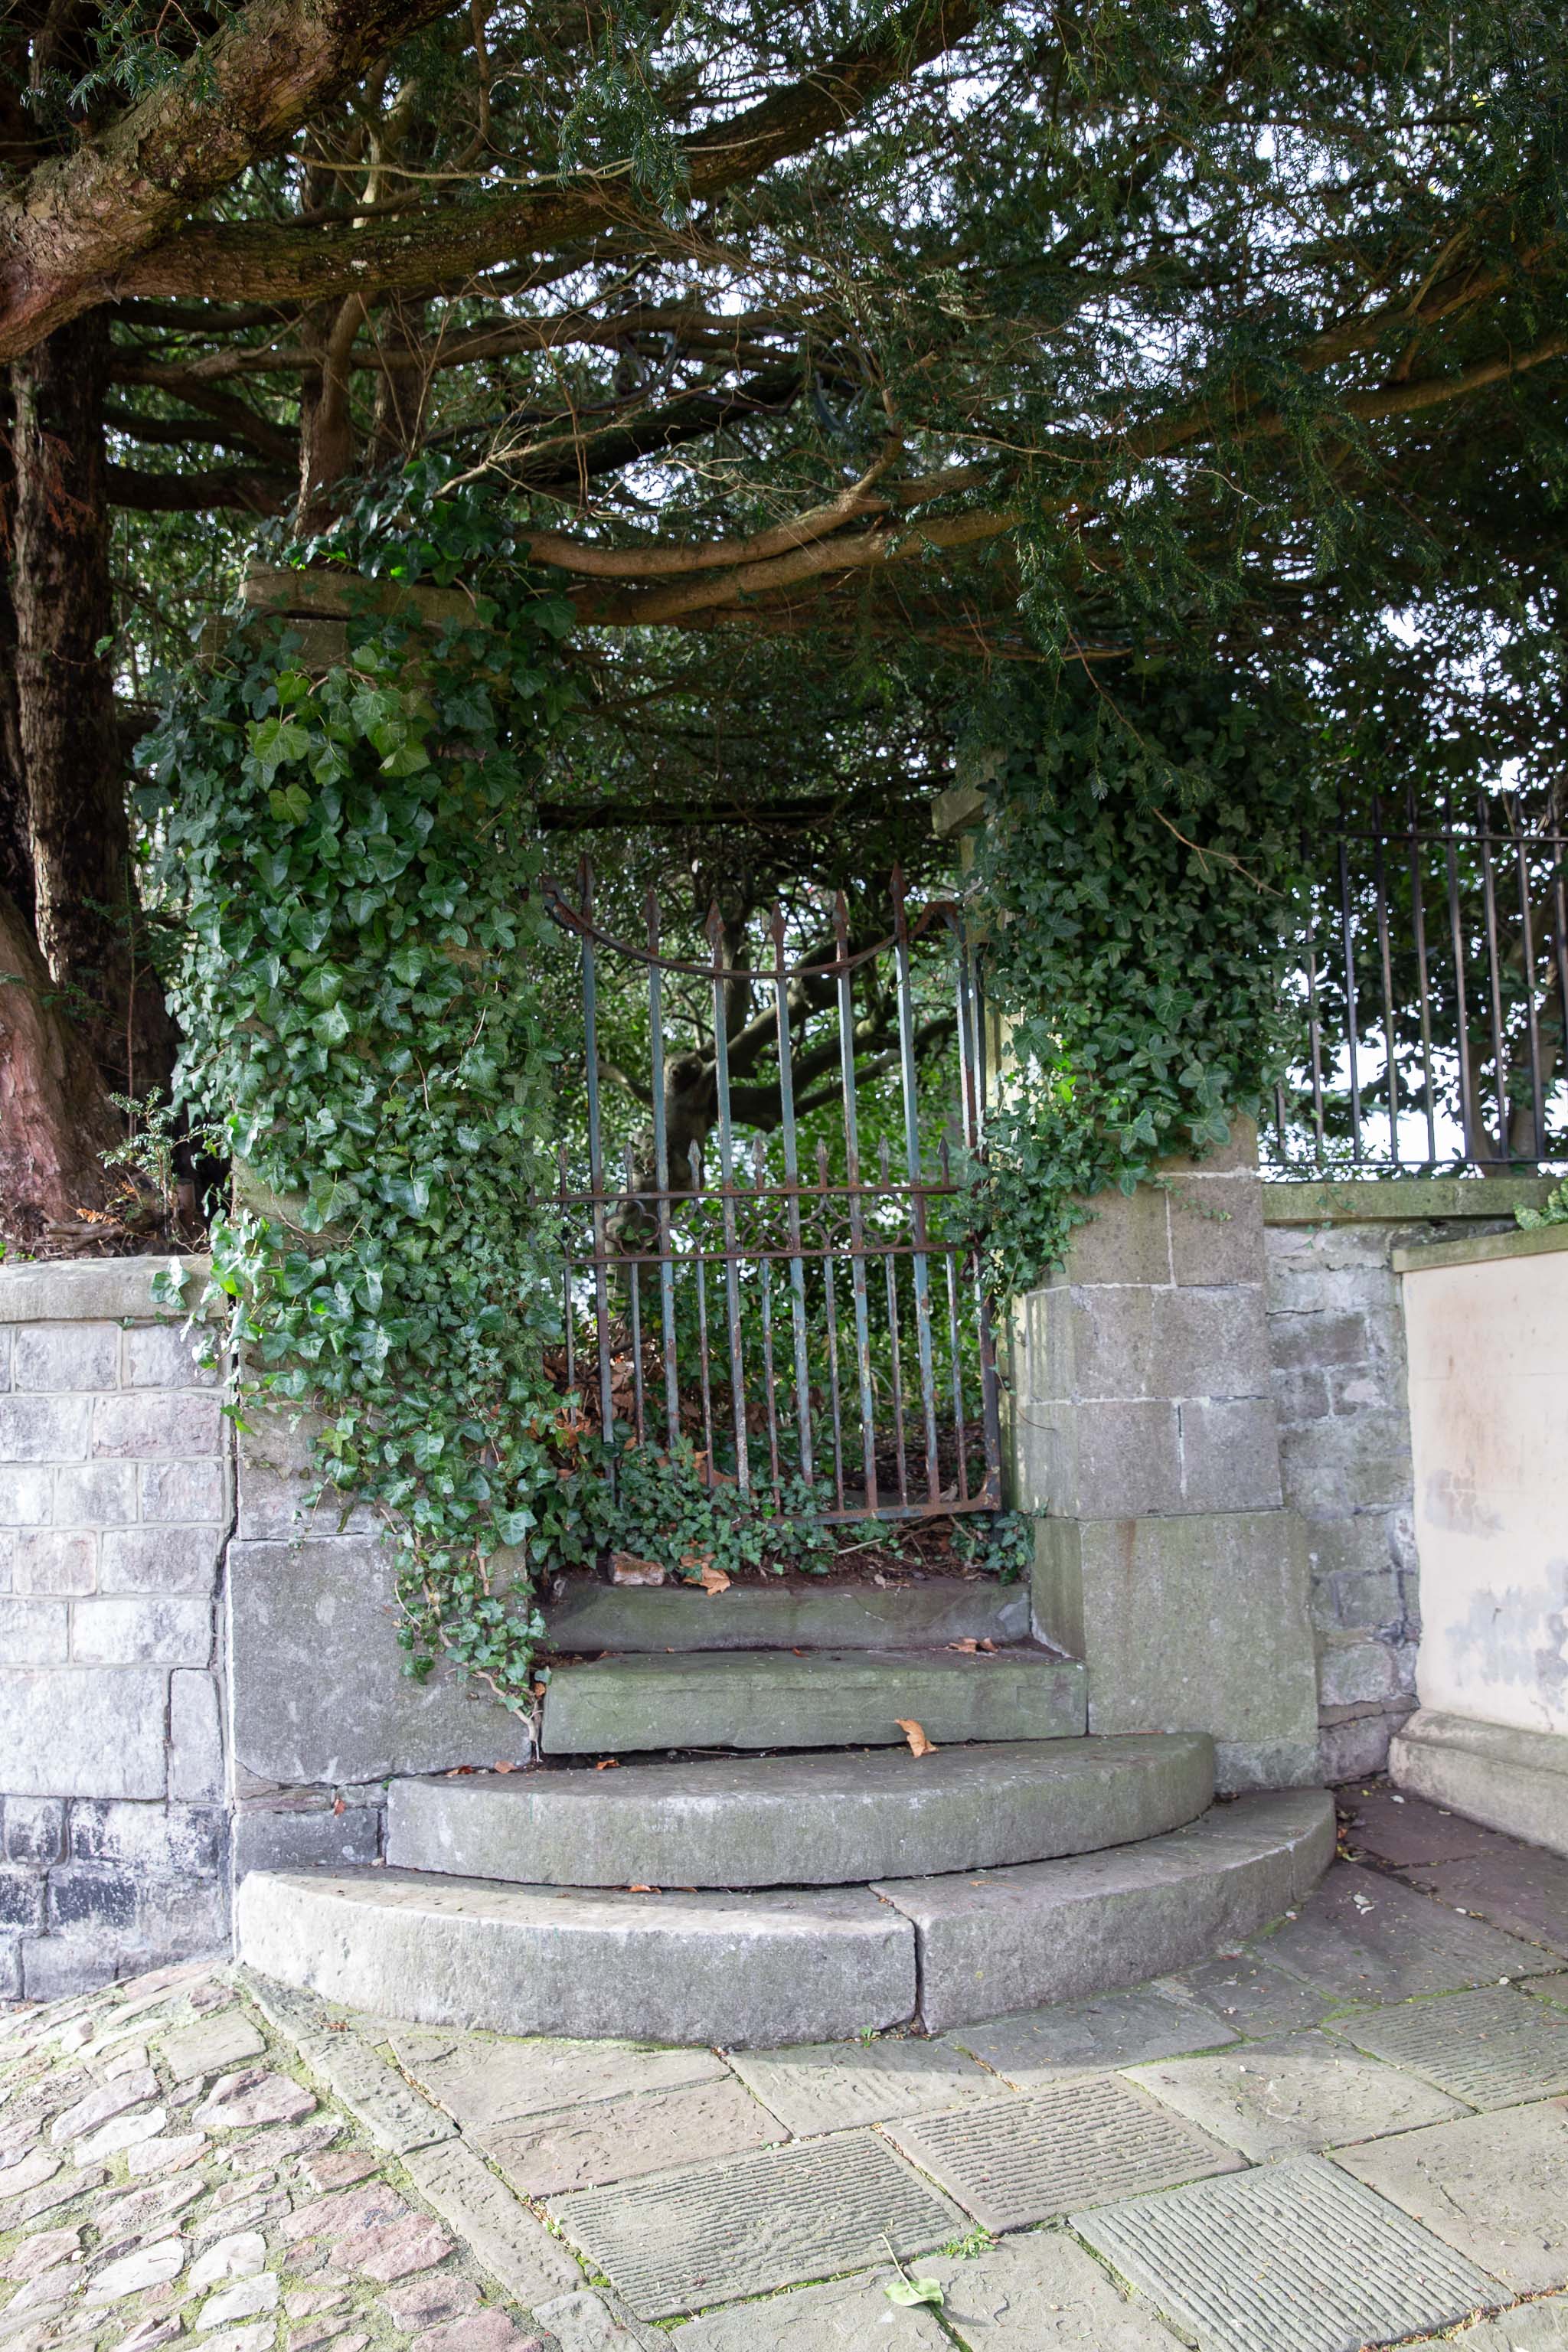 Disused
You'll have to walk a whole extra thirty feet or so to get to the main entrance to St. John's churchyard. Perhaps this was a handy shortcut from th...